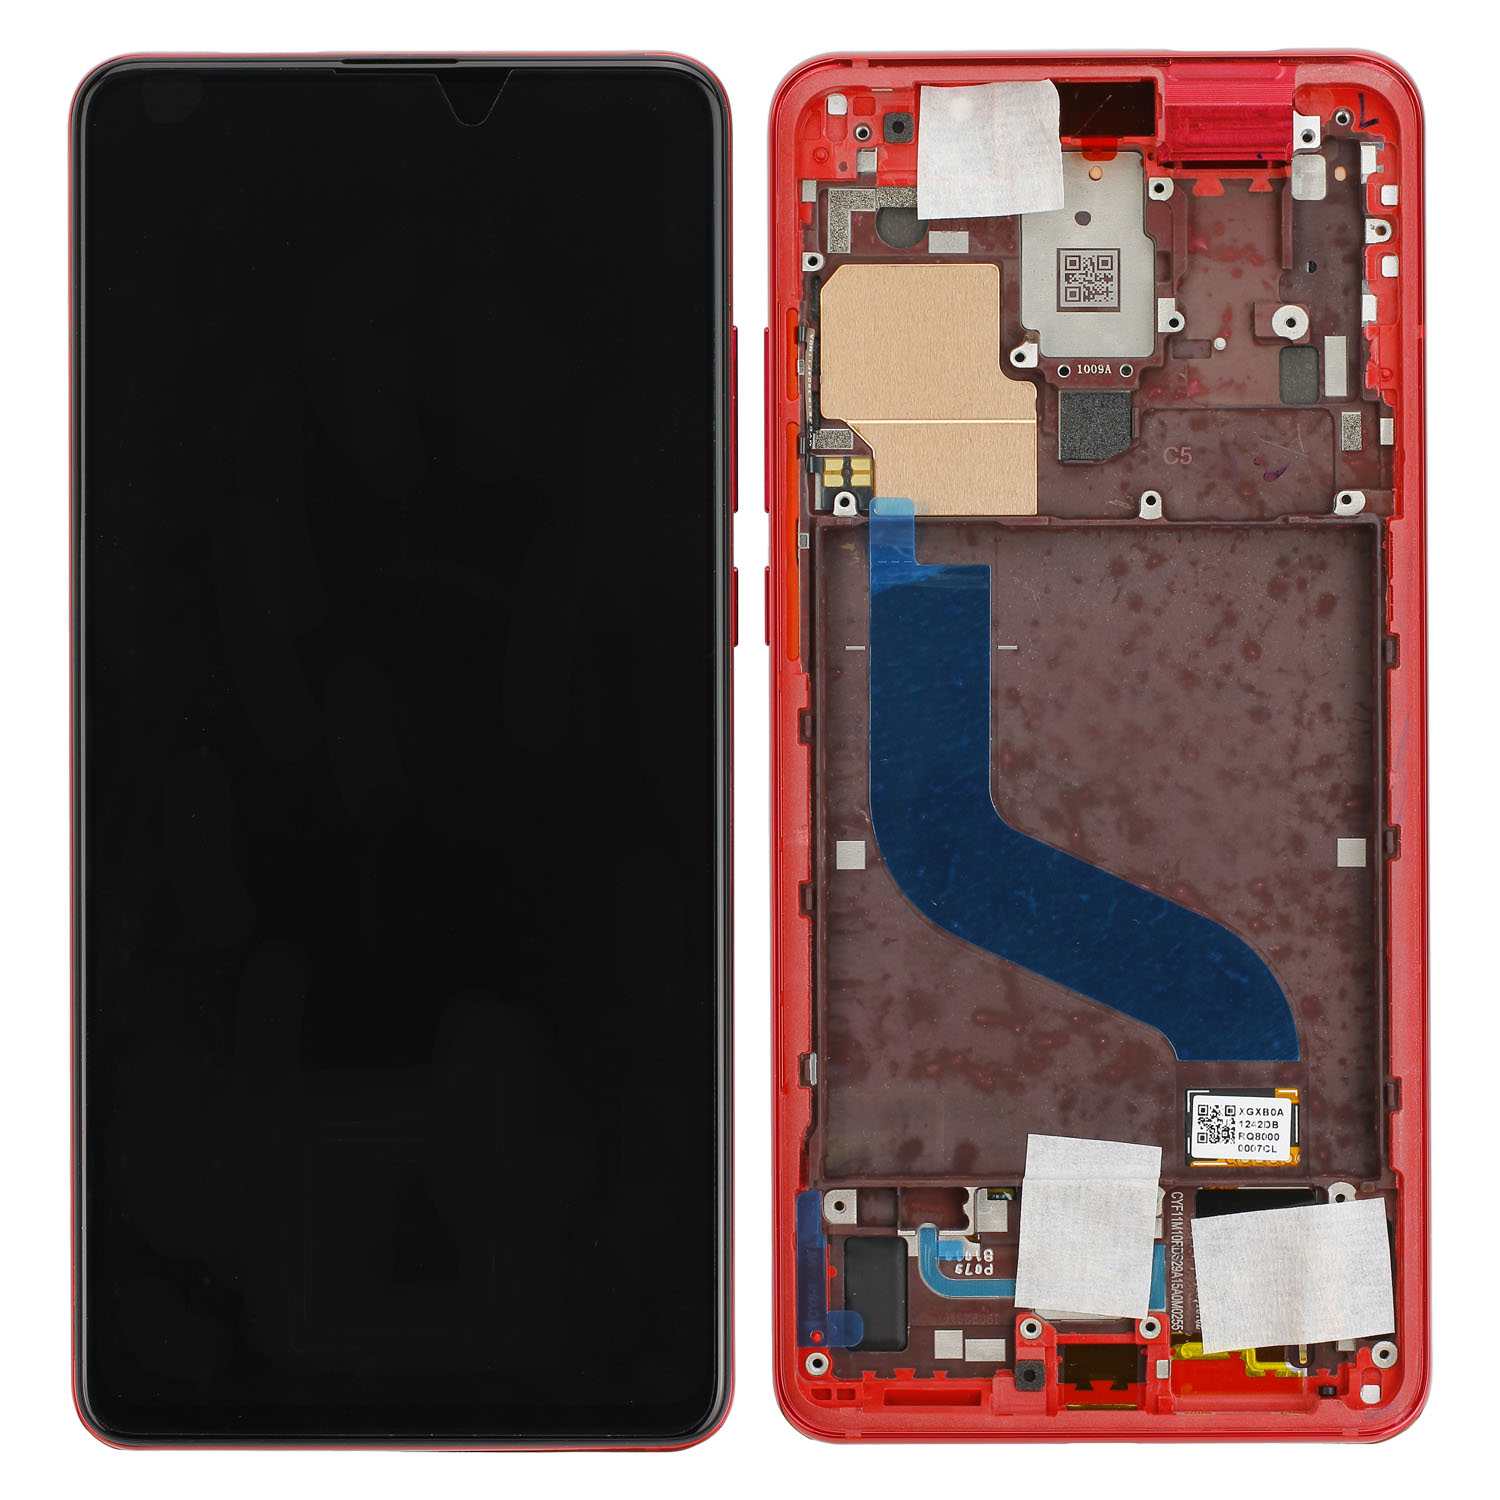 Xiaomi Mi 9T (M1903F10G), Mi 9T Pro (M1903F11G) LCD Display Red Flame, Service Pack